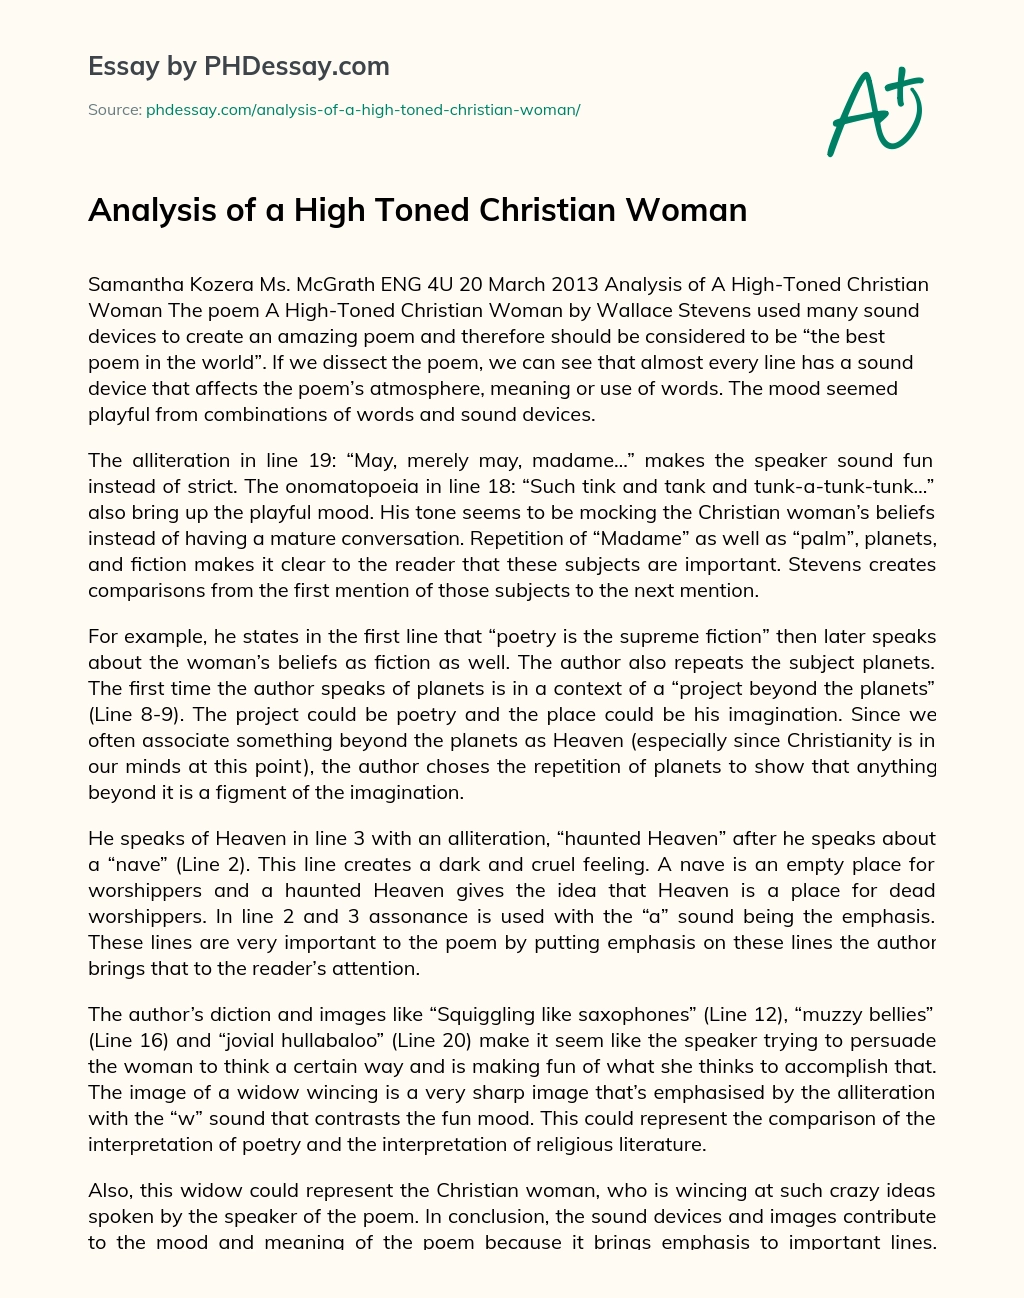 Analysis of a High Toned Christian Woman essay